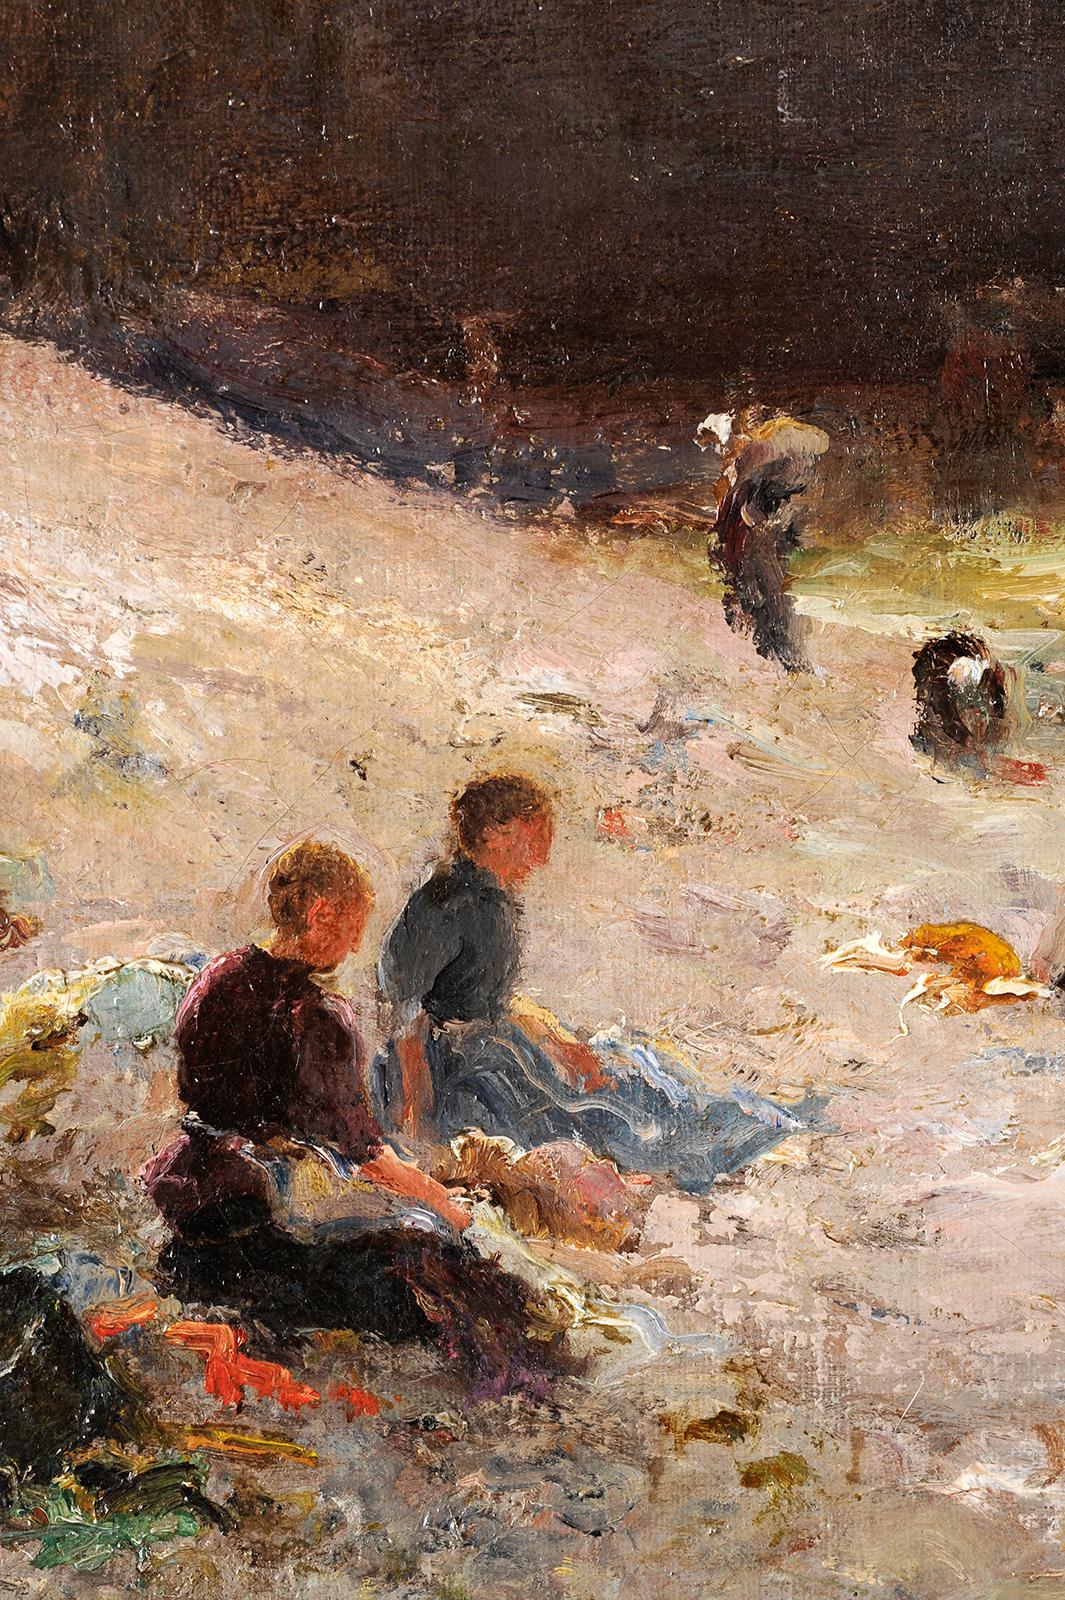 Georges VILLAIN
(1854, Paris – 1930)
Washerwomen on the beach at Étretat
Oil on canvas
H. 51 cm; L. 65 cm
Signed lower right Around 1900

Son of Eugène Marie François (1821-1897), who was a pupil of Charlet and Léon Cogniet, Georges trained with